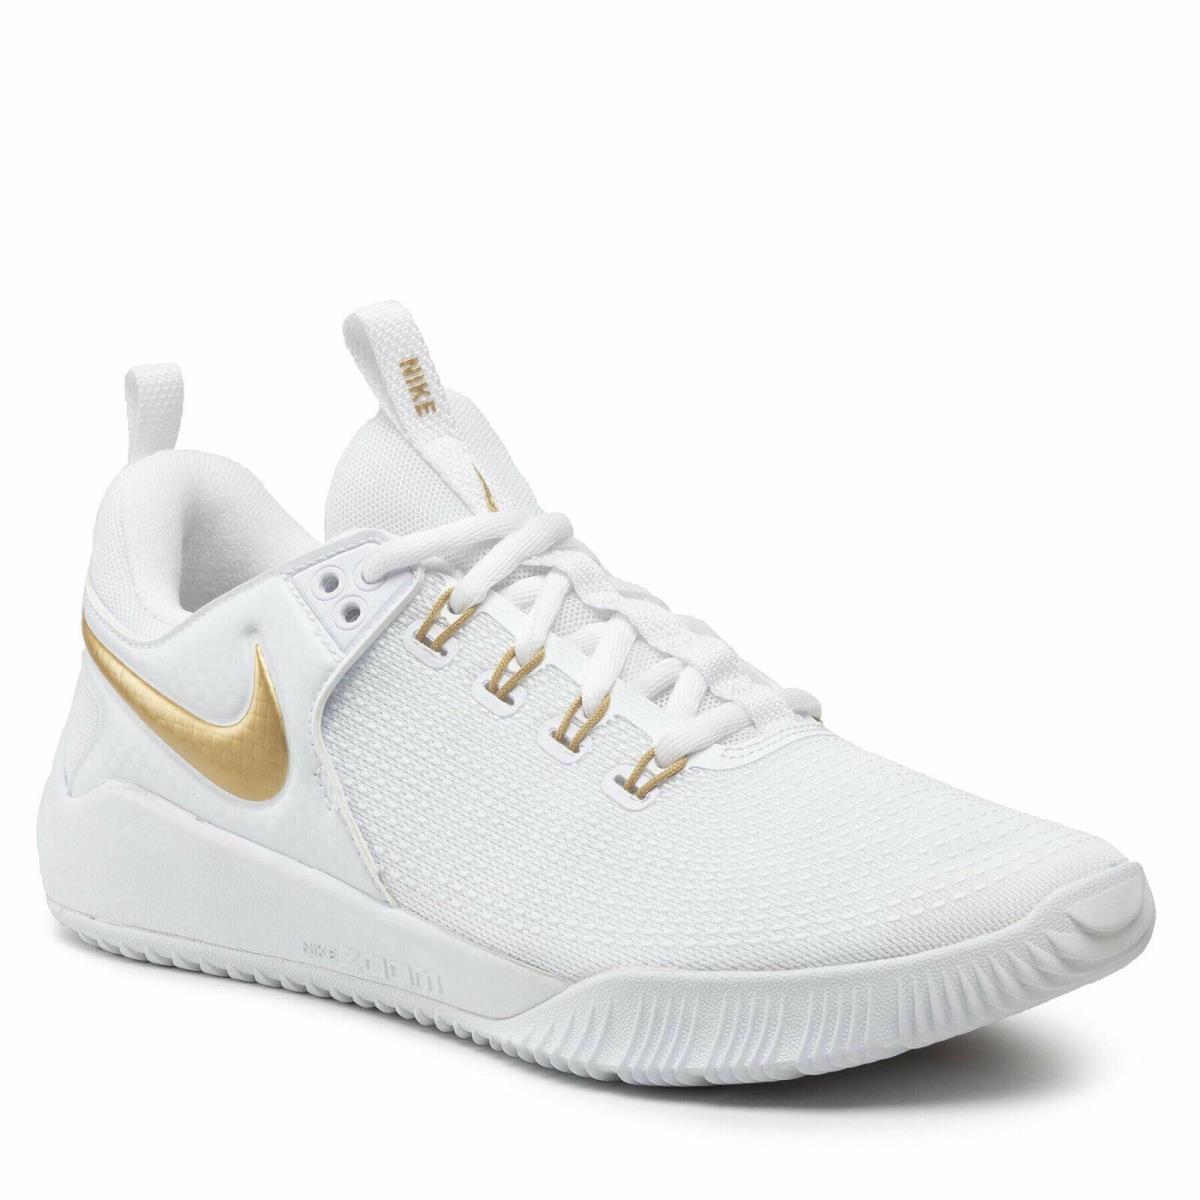 Nike Air Zoom Hyperace 2 SE White Gold DM8199-170 Volleyball Shoes Womens 9.5